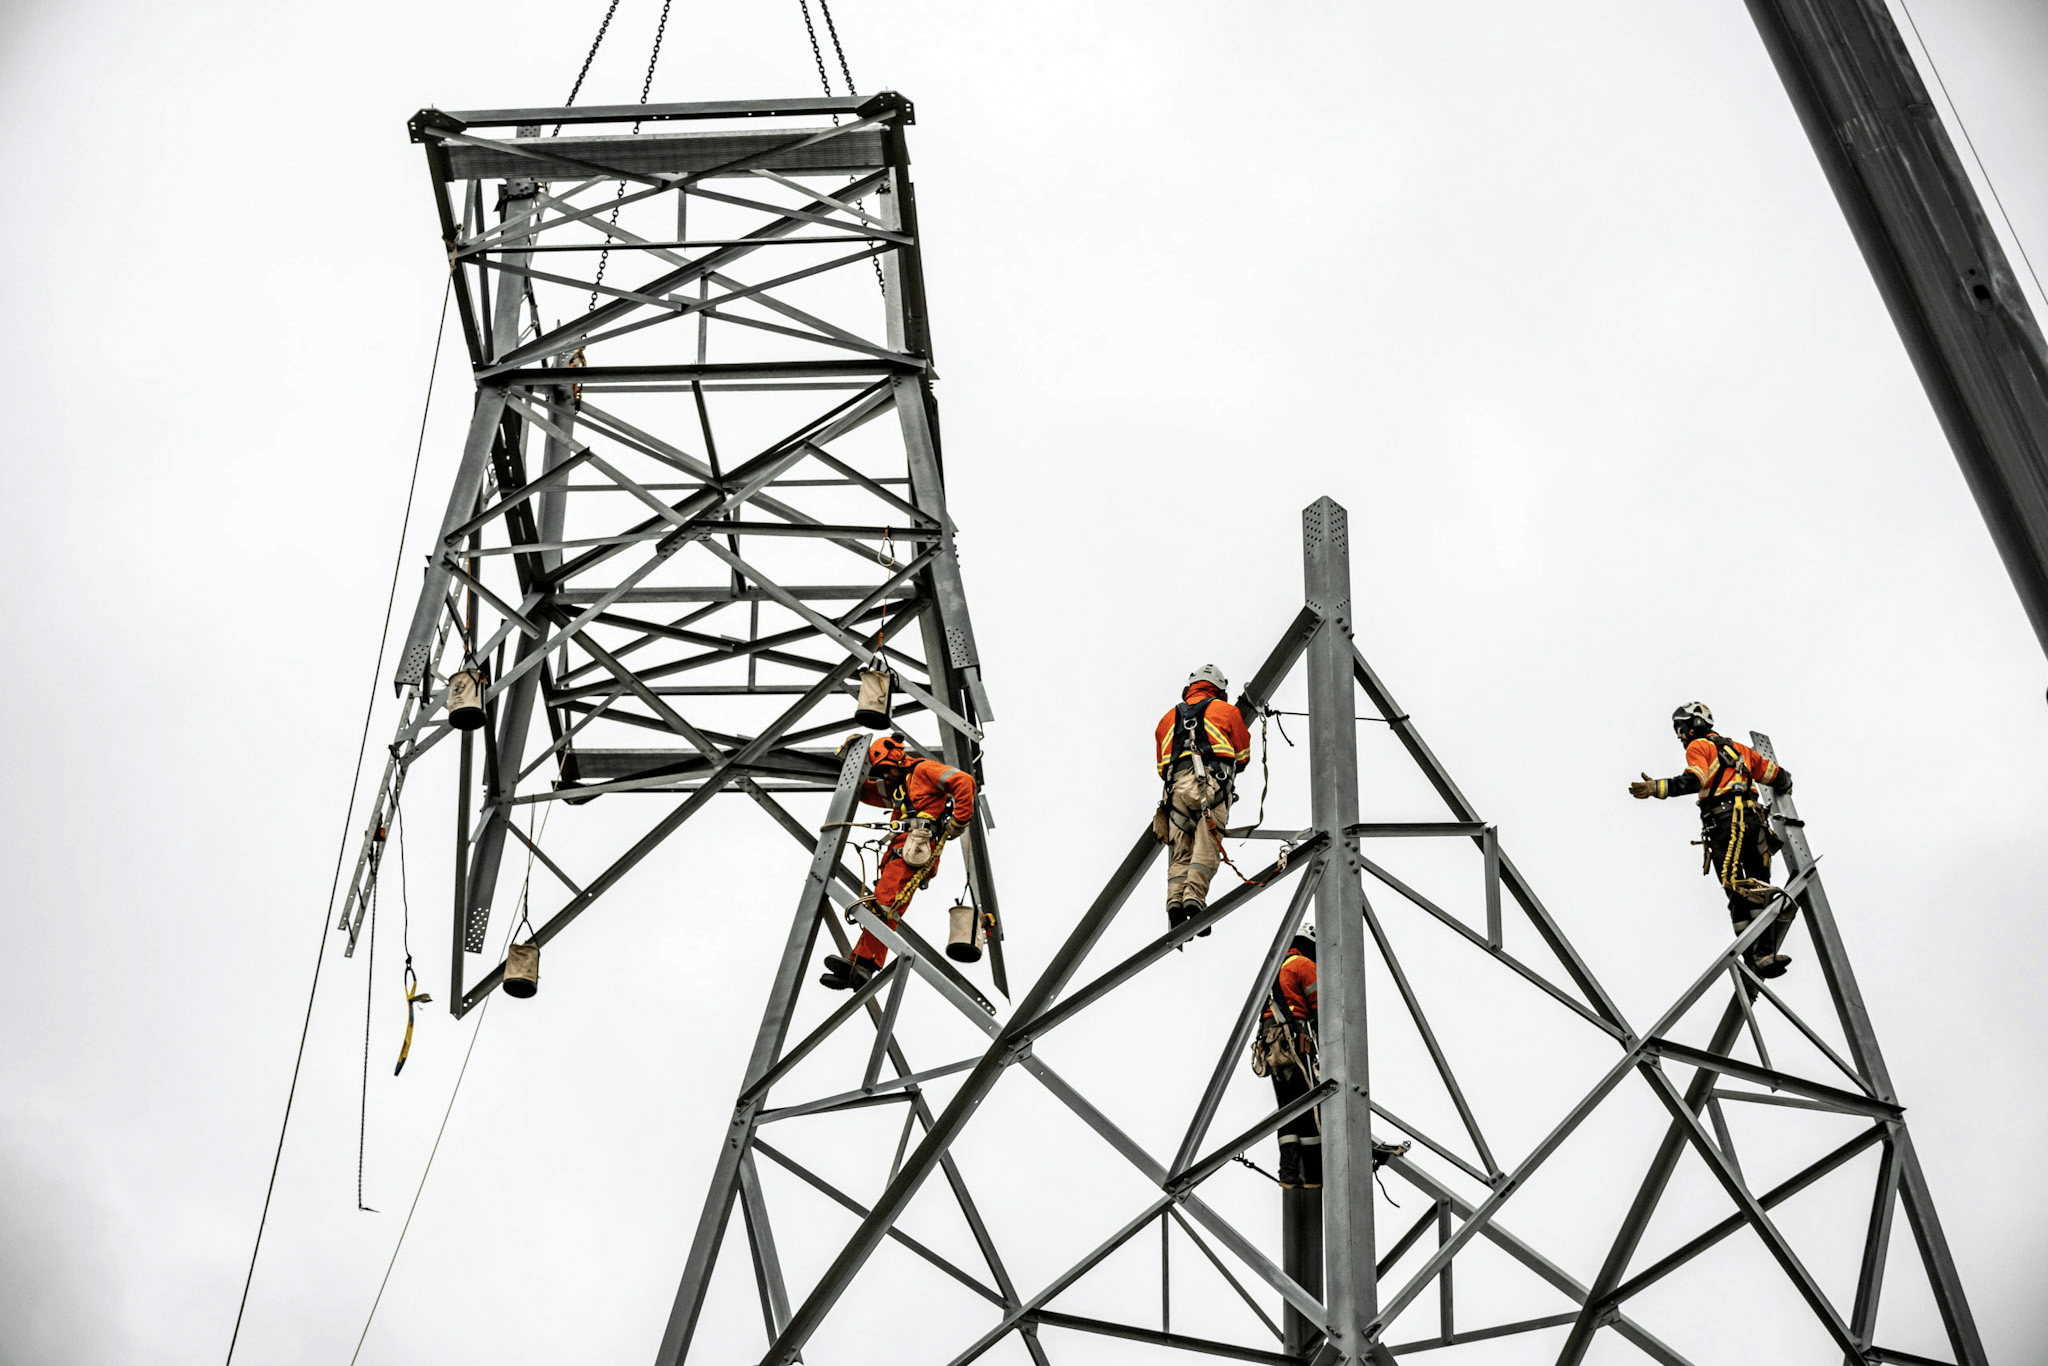 Men working on an electrical tower